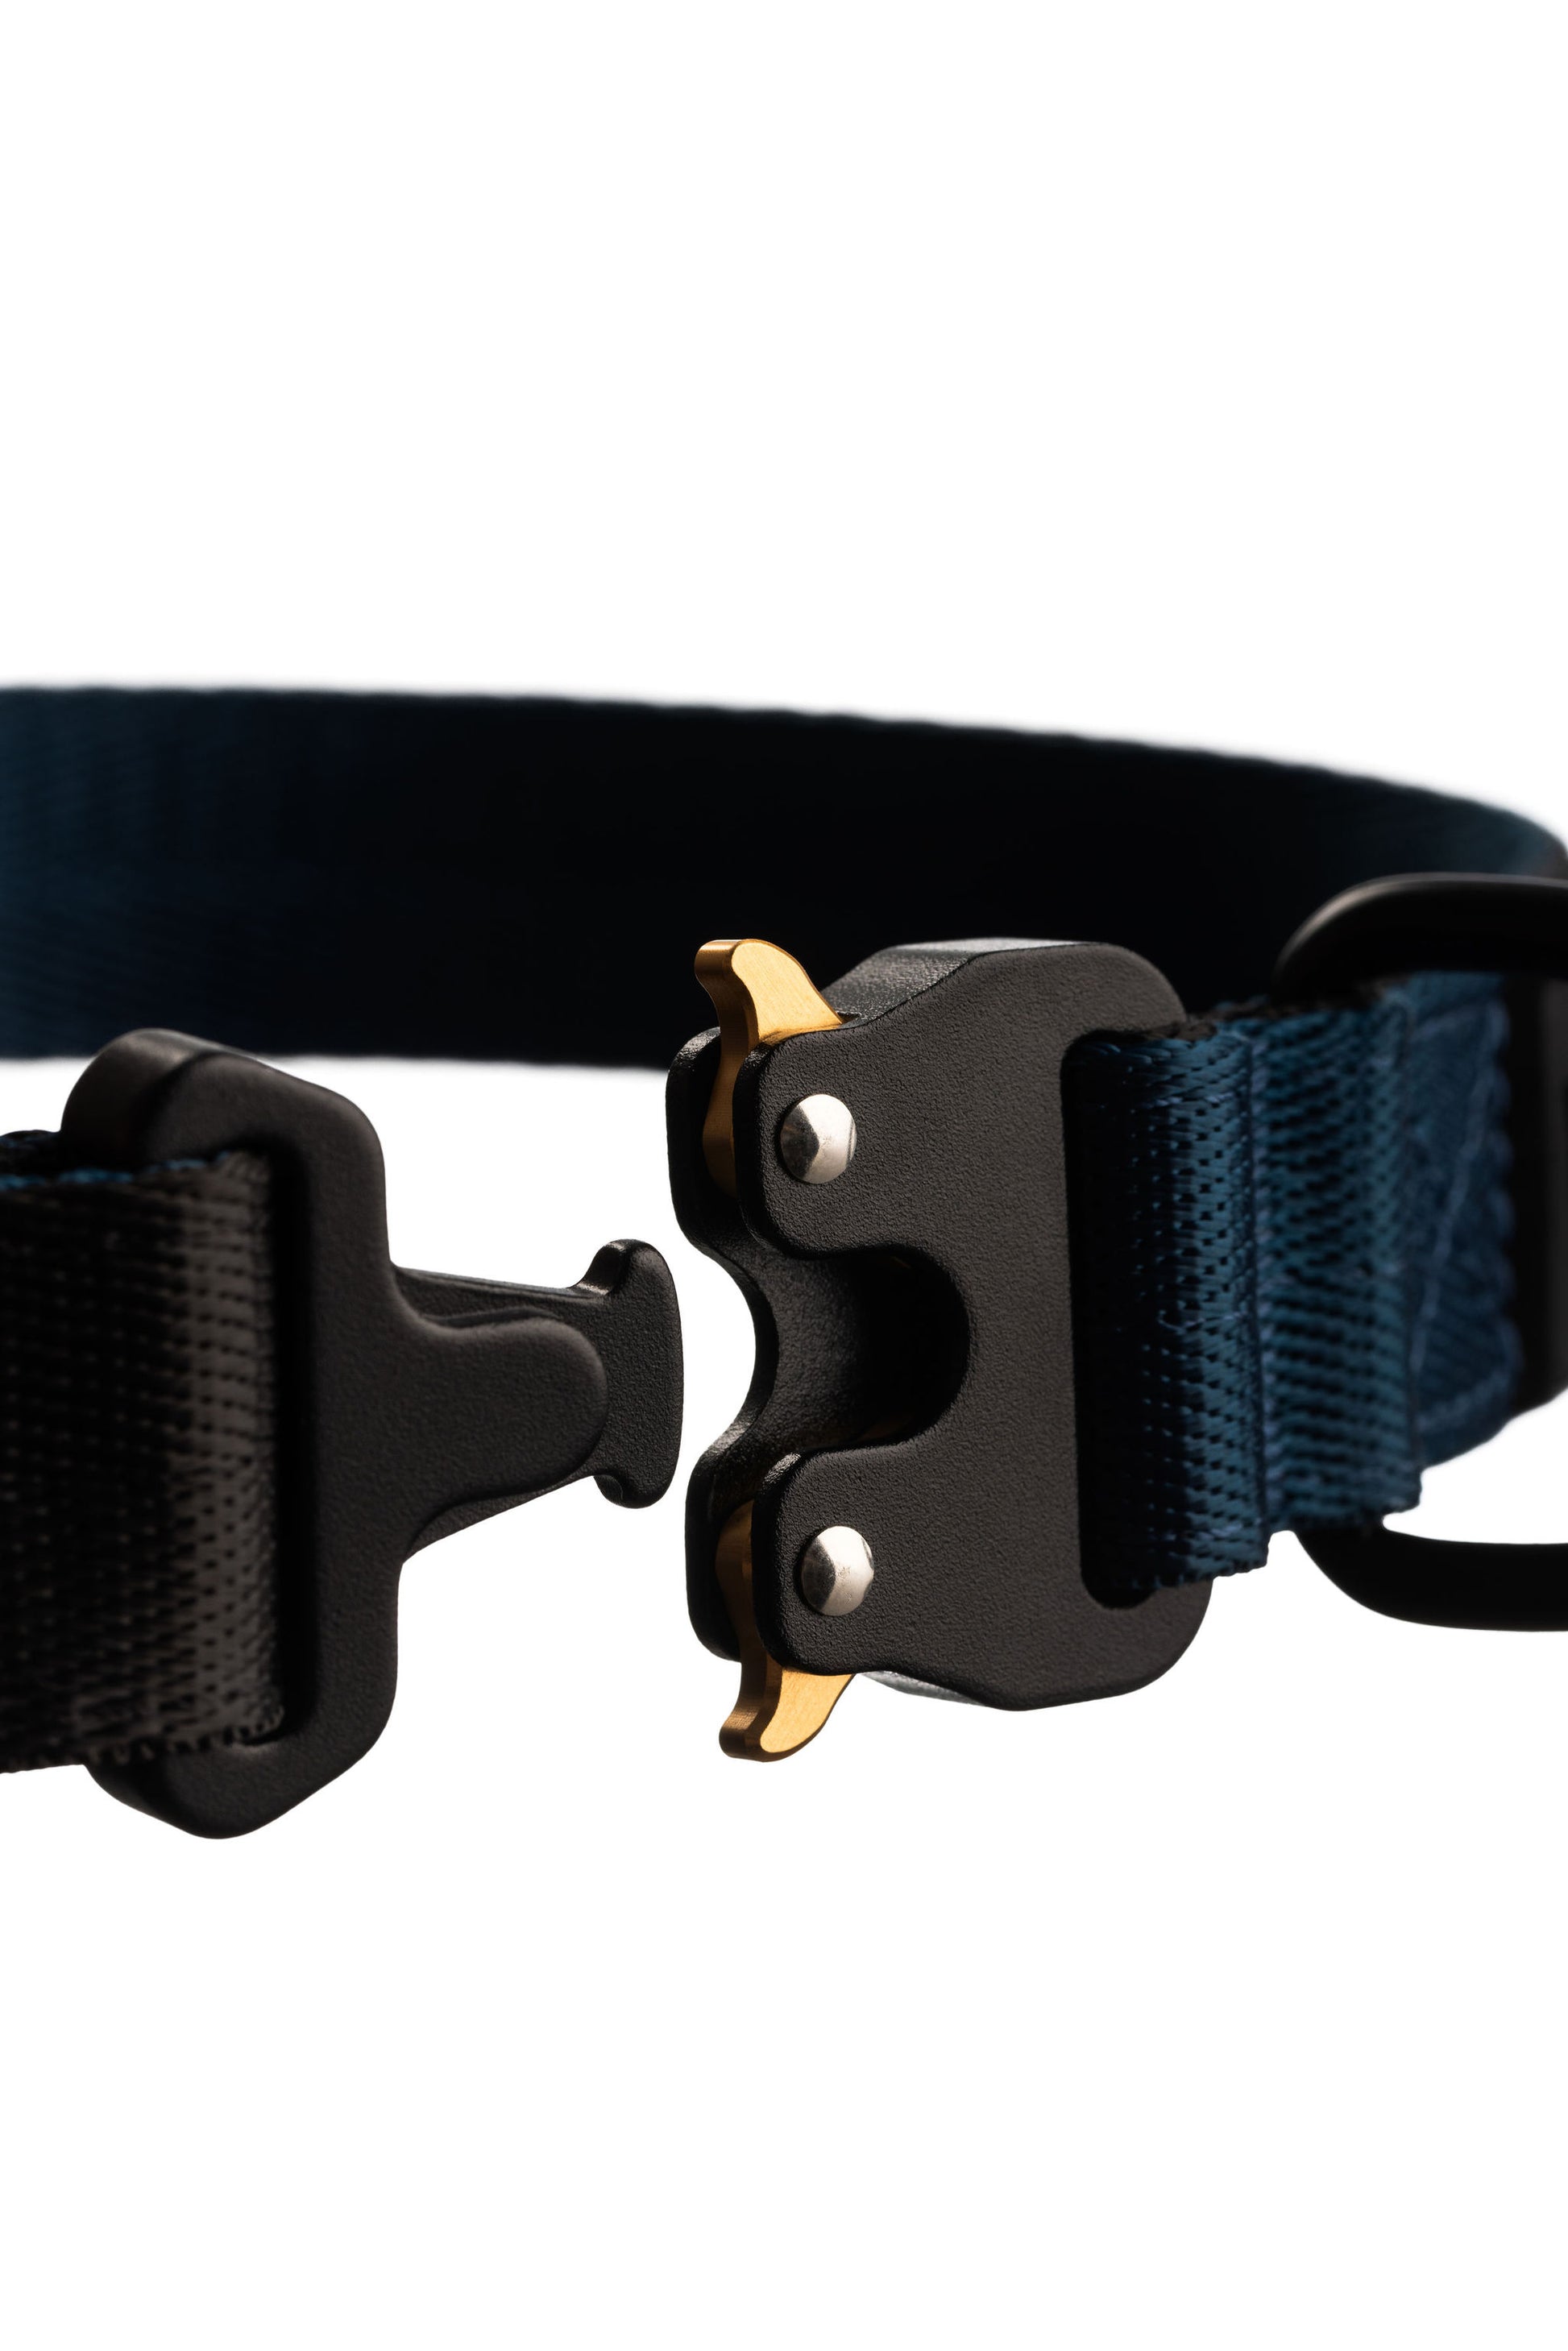 Close up of dog collar clip open. Black clip with gold tabs.